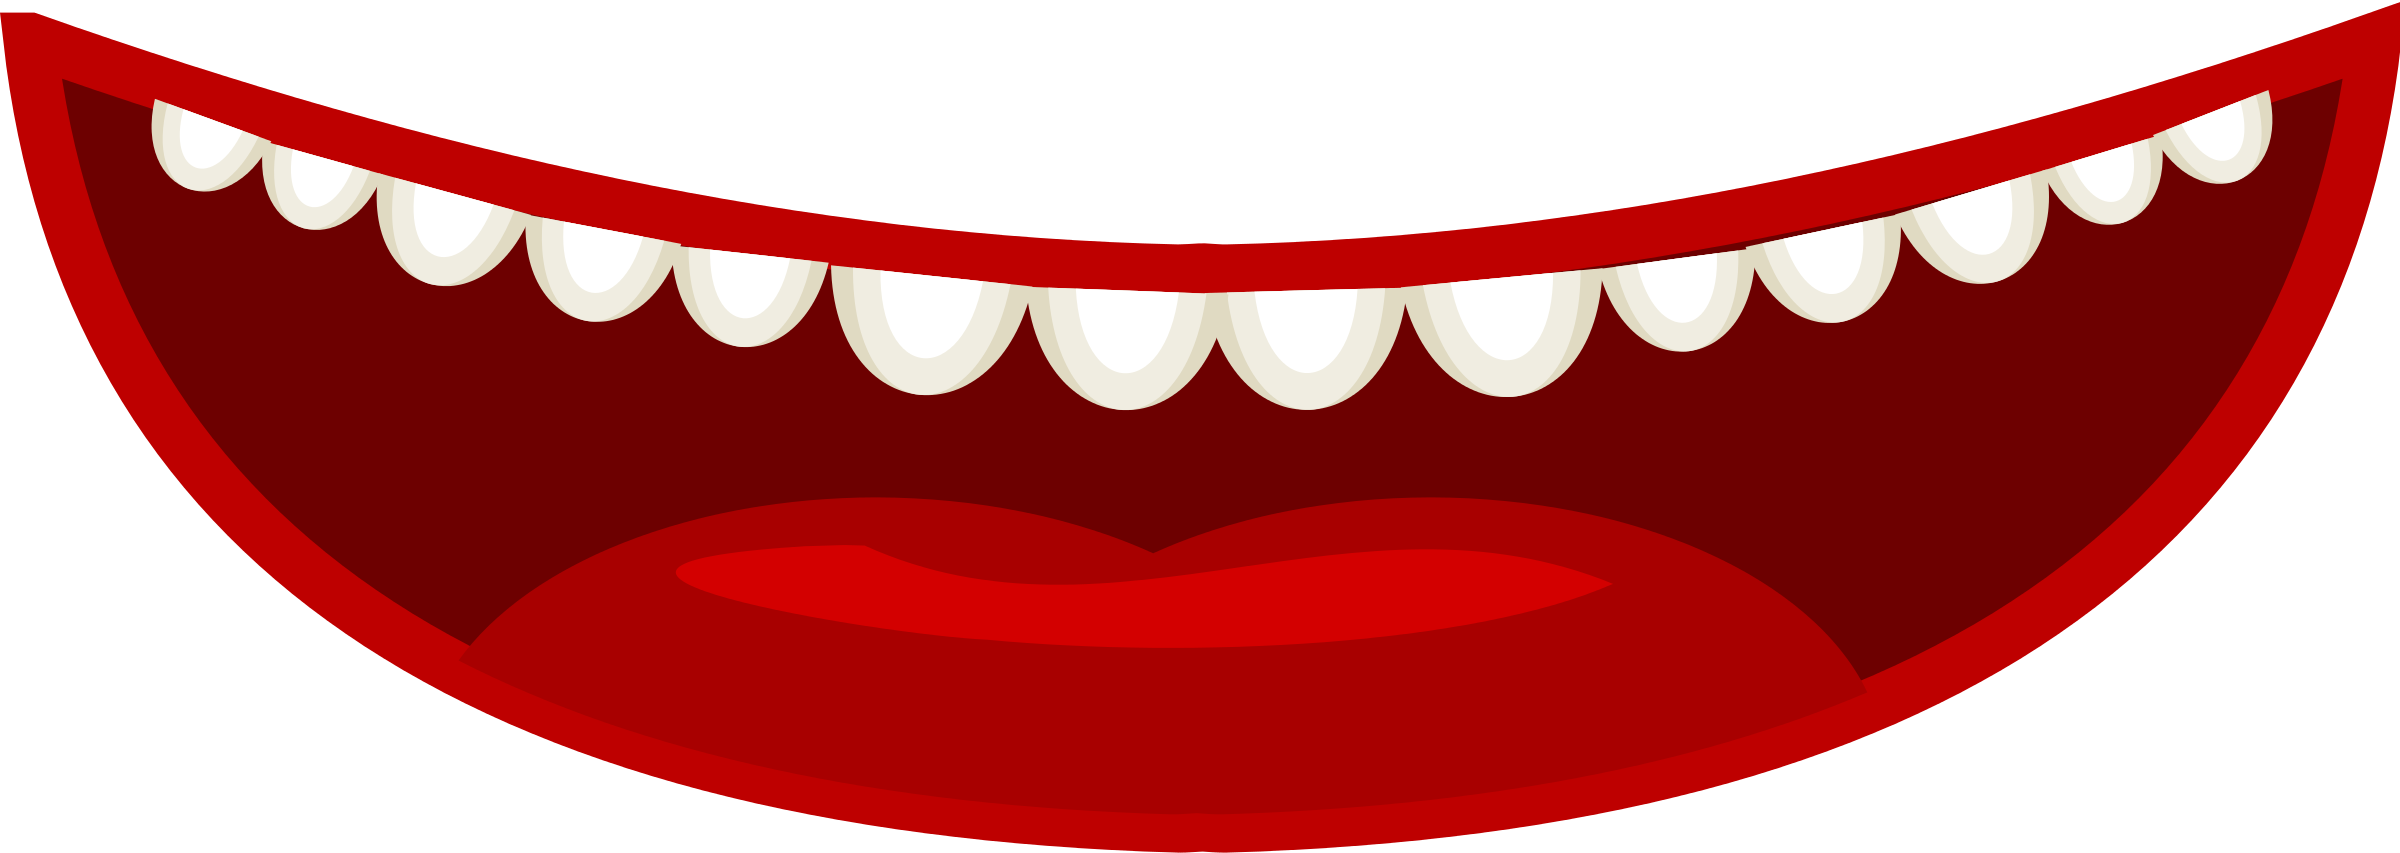 Images For  Cartoon Mouth Clip Art